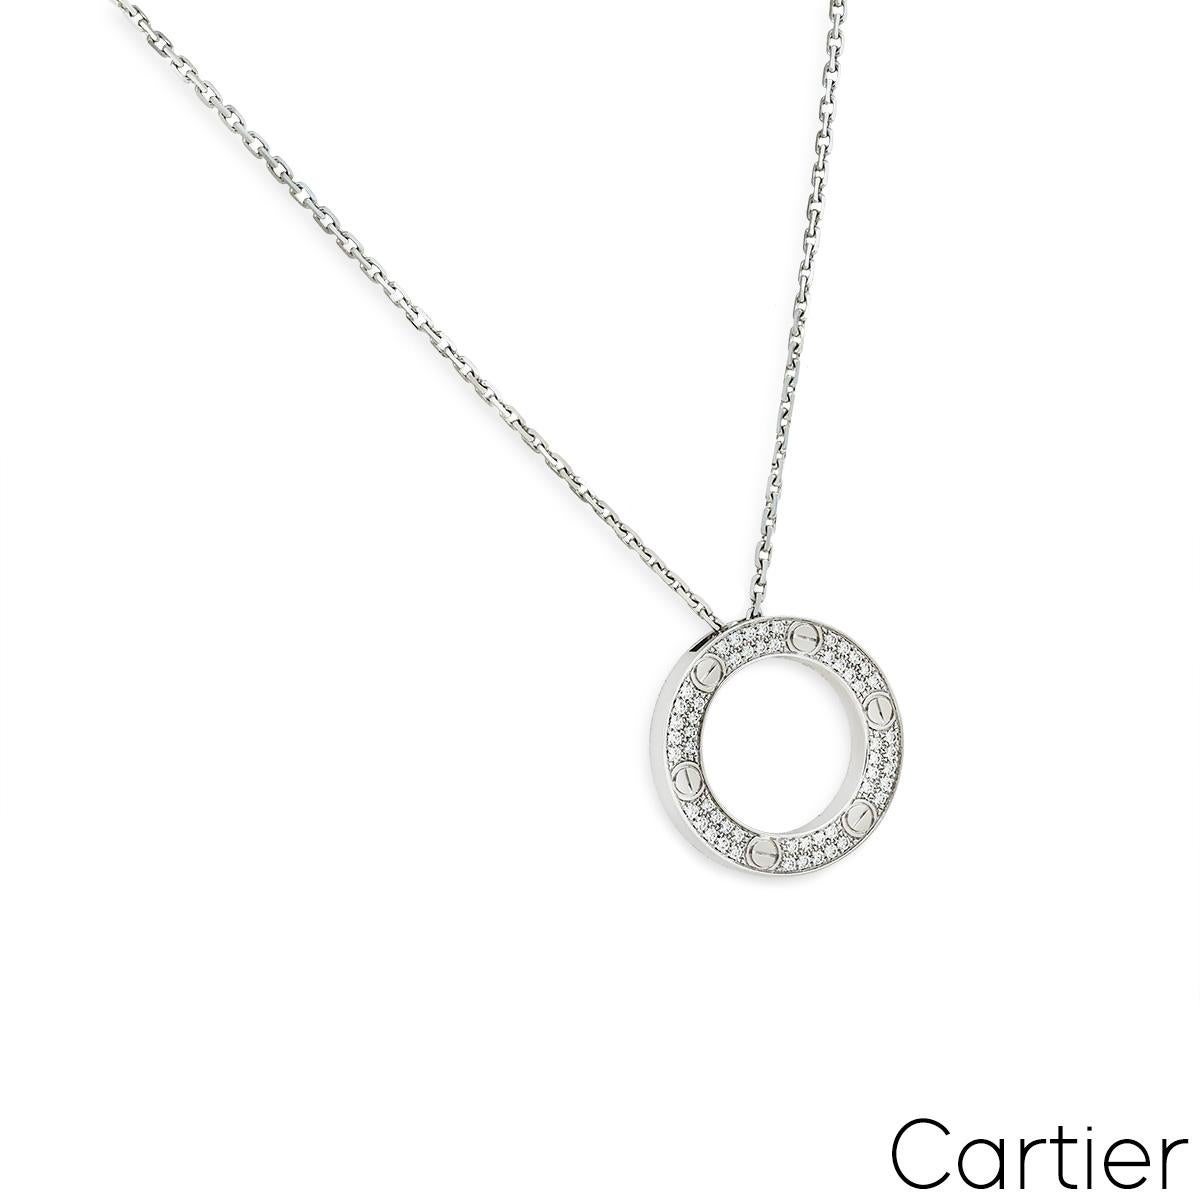 An 18k white gold necklace by Cartier from their Love collection. The pendant is composed of an open circular motif, with the iconic Cartier screws, and finally set with 54 round brilliant cut diamonds, totalling 0.34ct. On the reverse of the